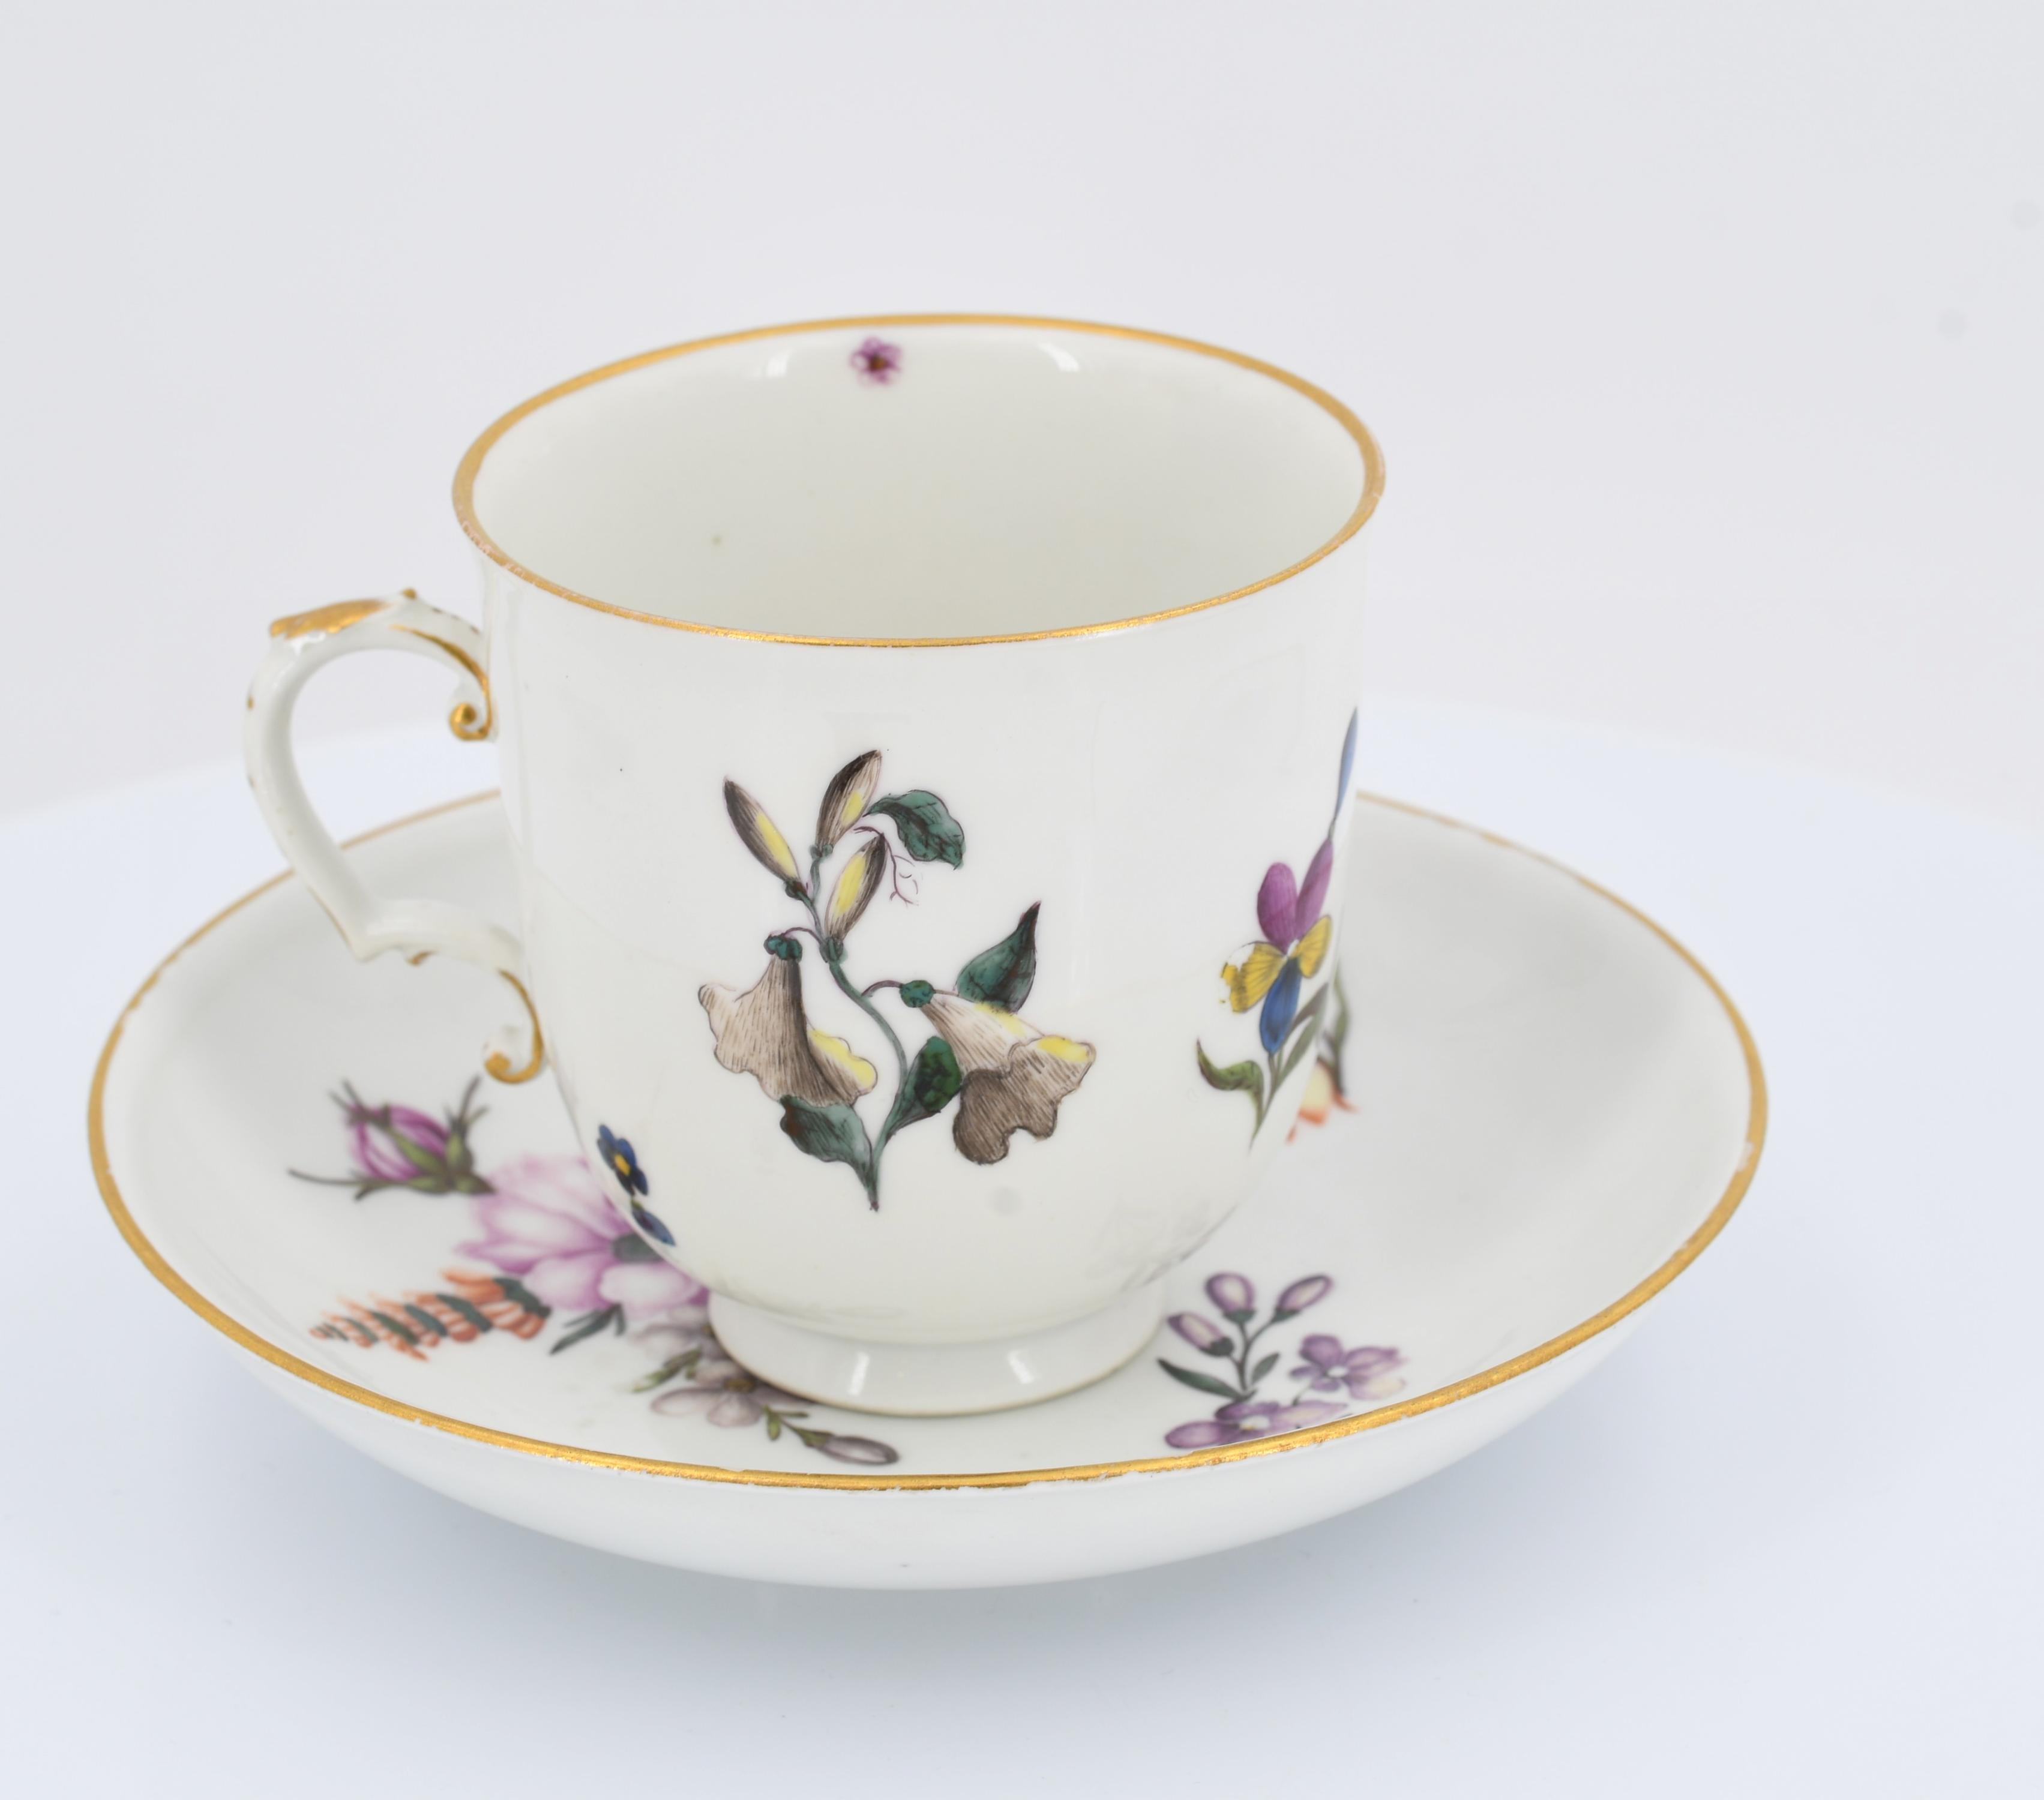 Cup and saucer with floral décor - Image 4 of 7